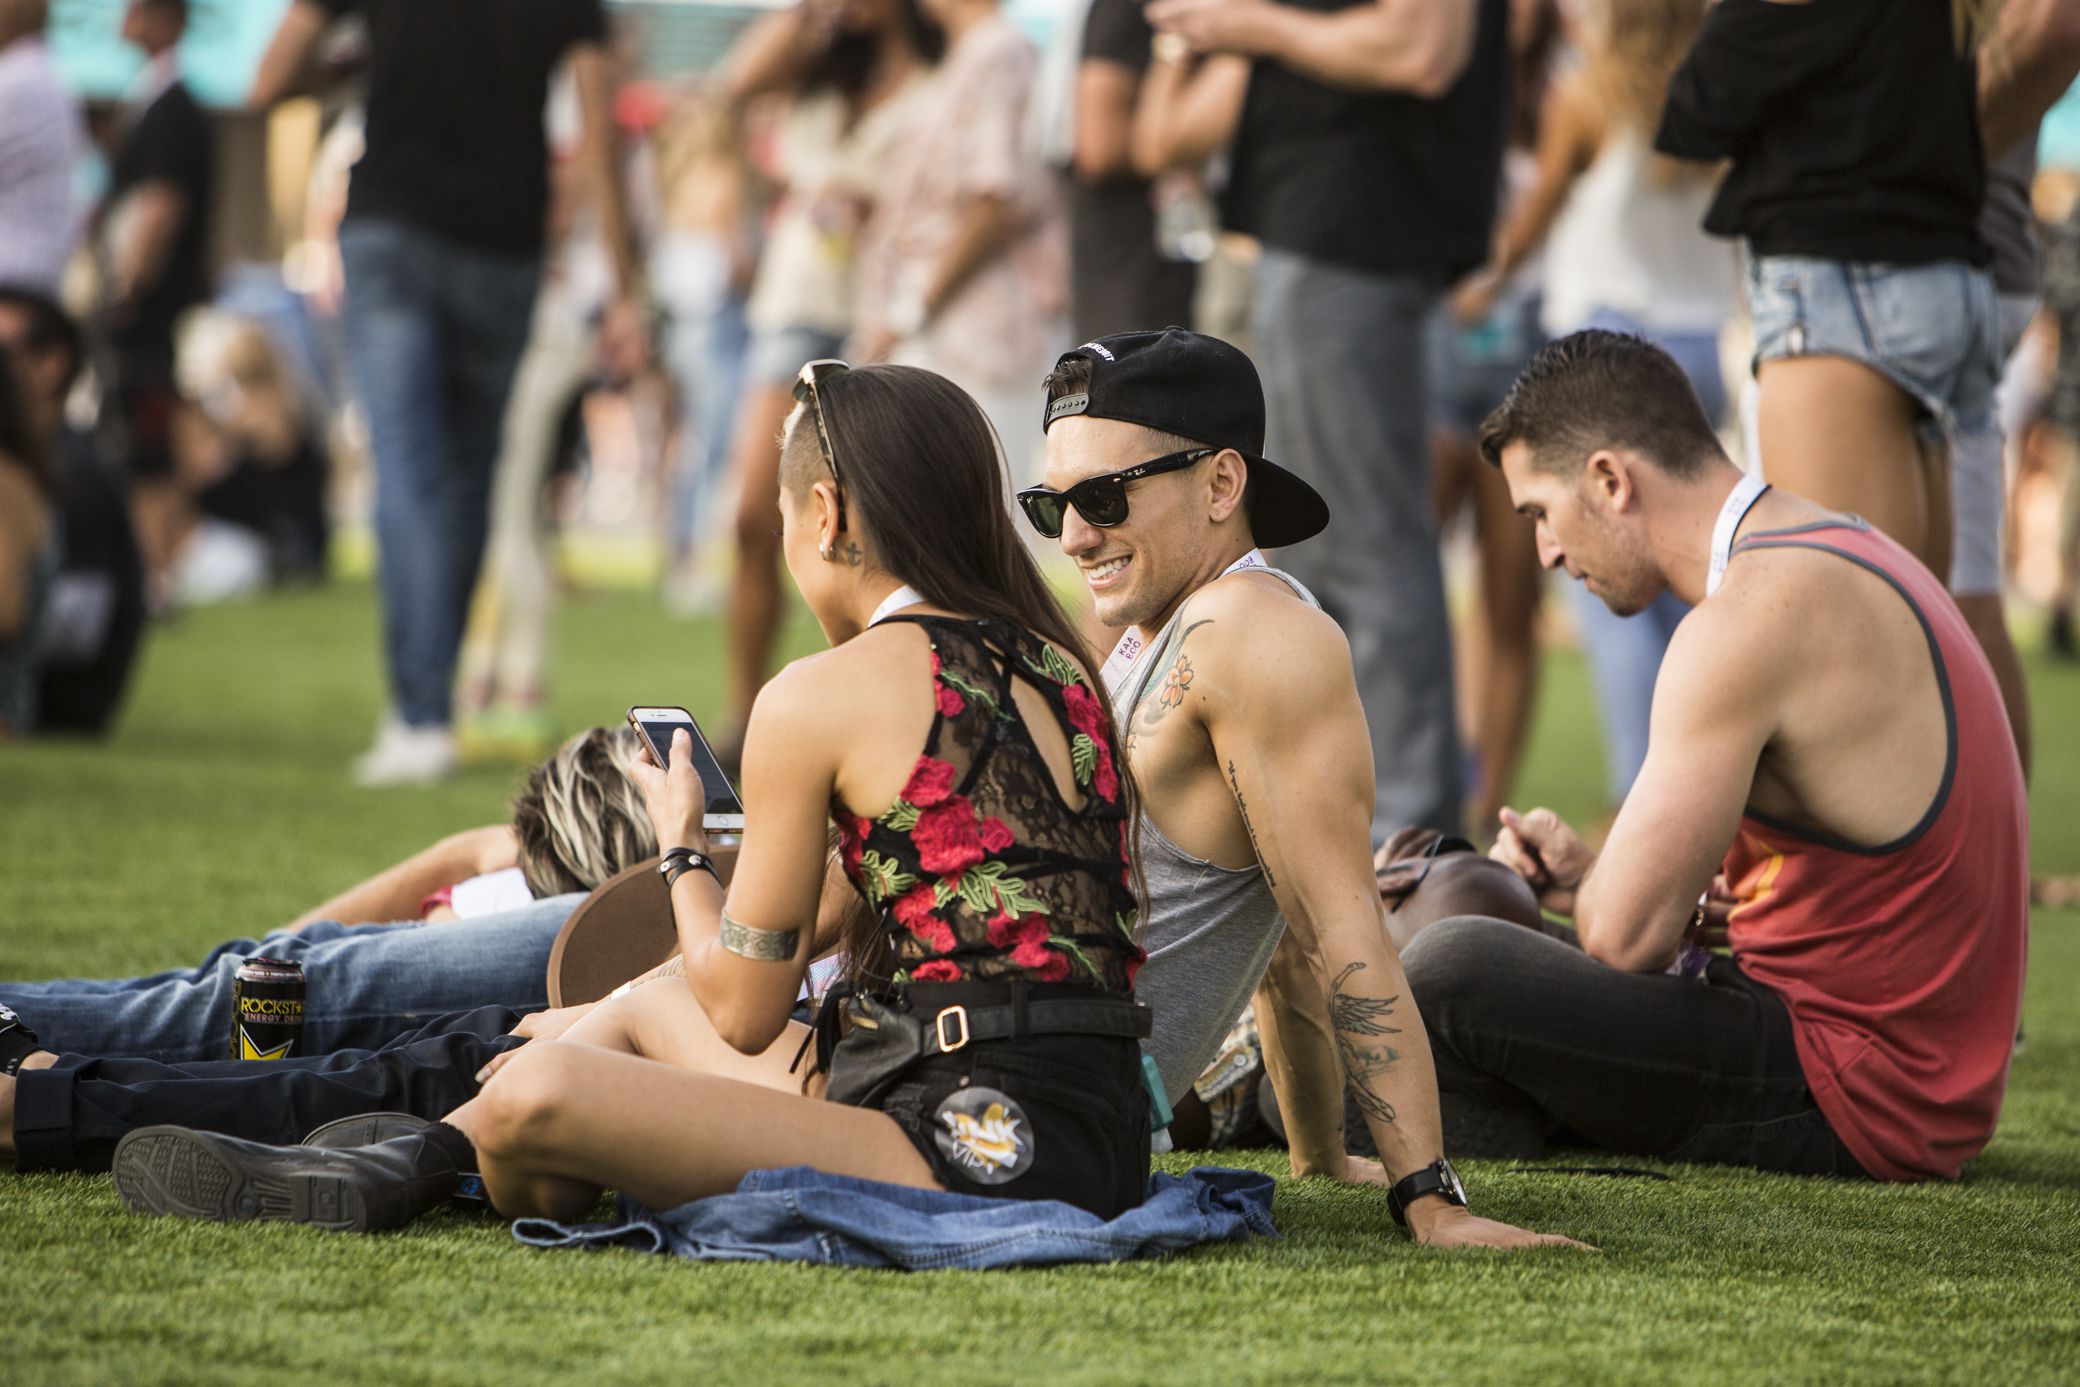 kaaboo 2 2 KAABOO Del Mar Succeeds at Being a Festival for Everyone